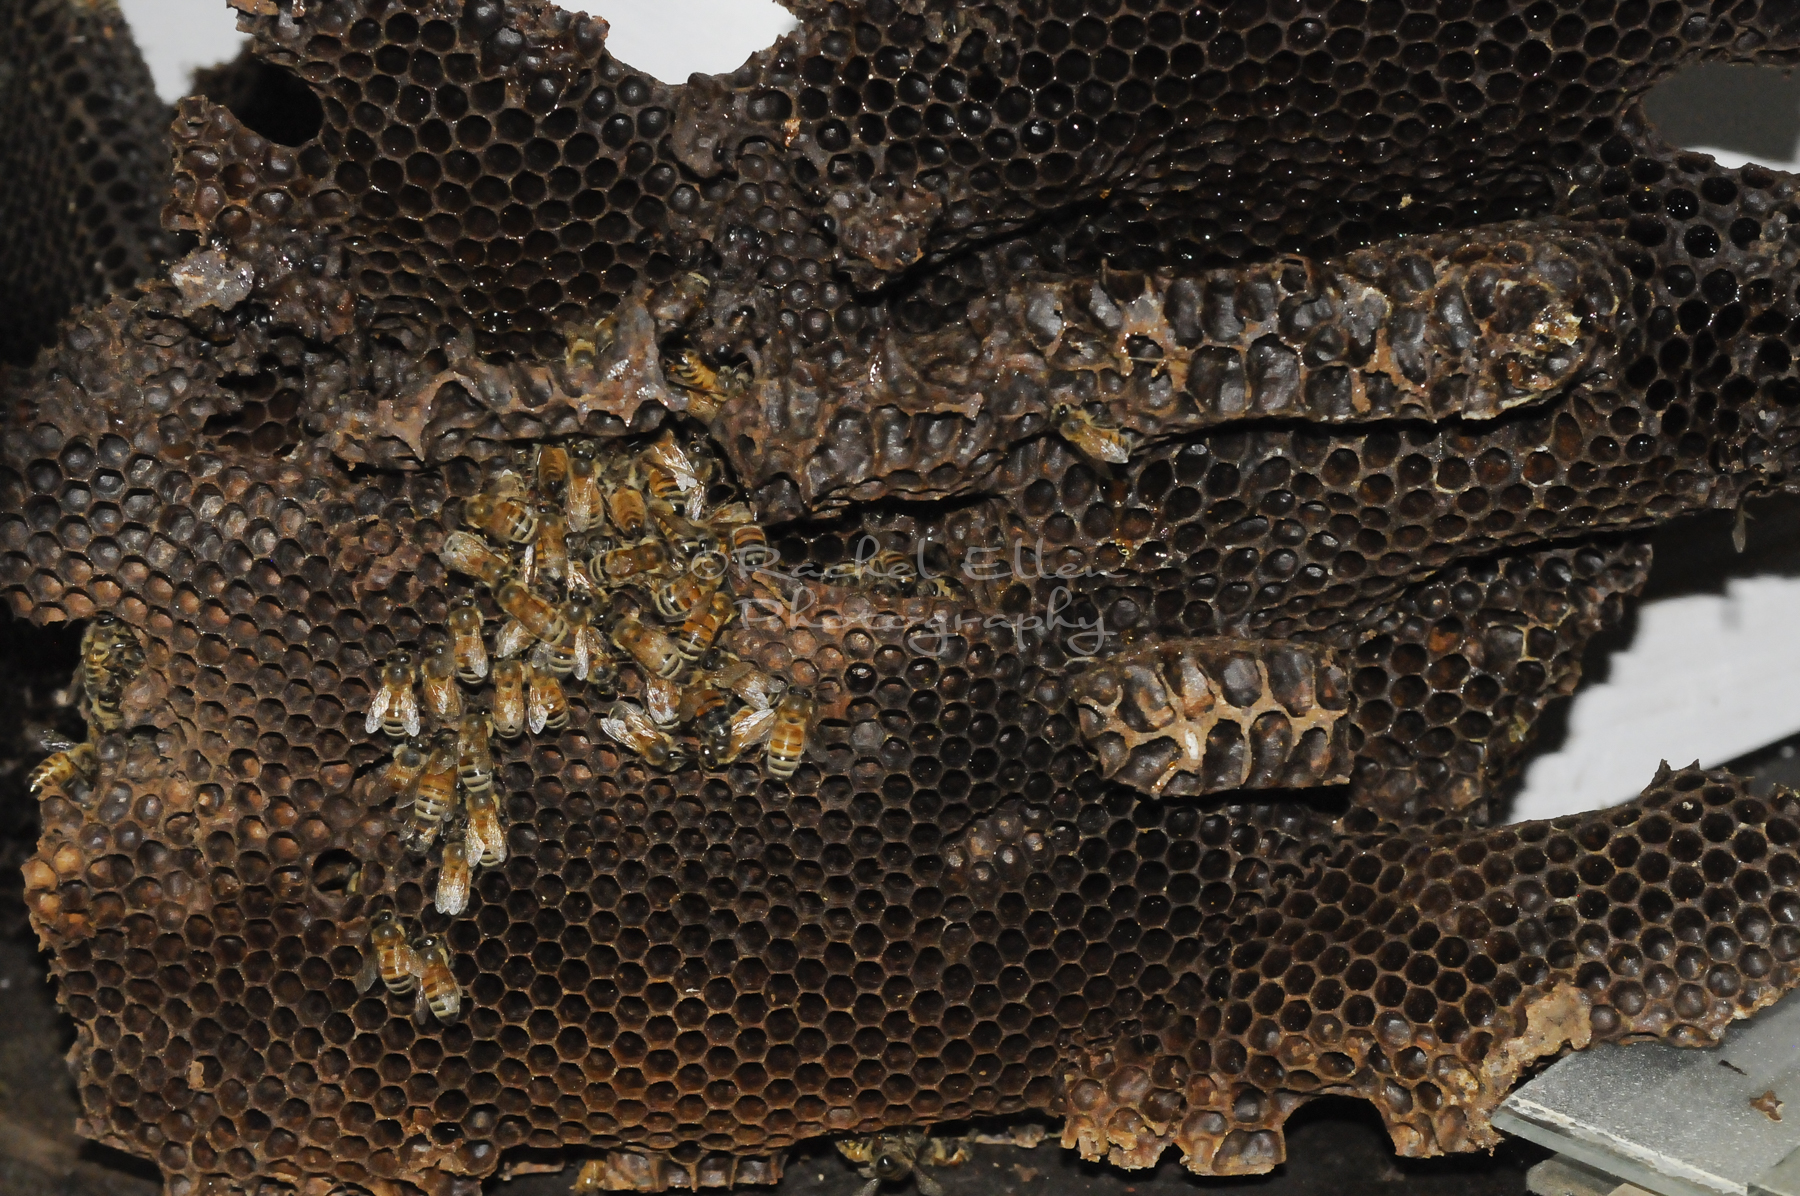 bees on brood comb